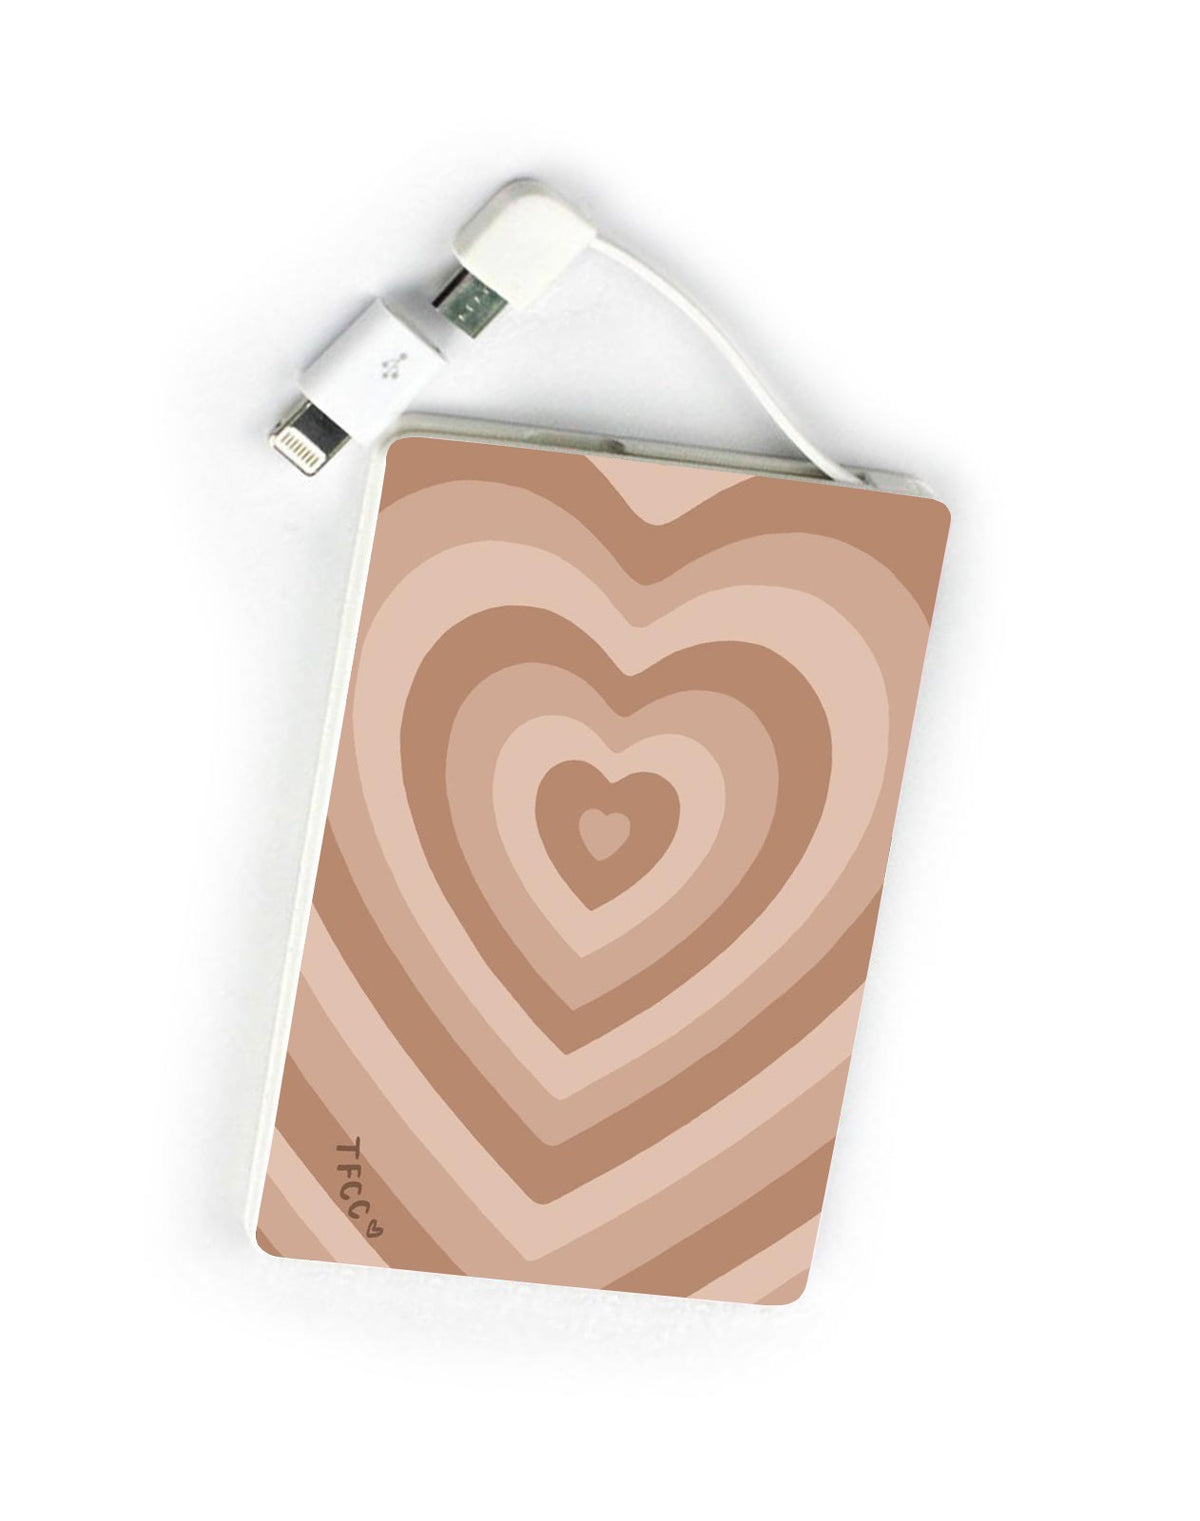 Brown heart Power Bank - thefonecasecompany